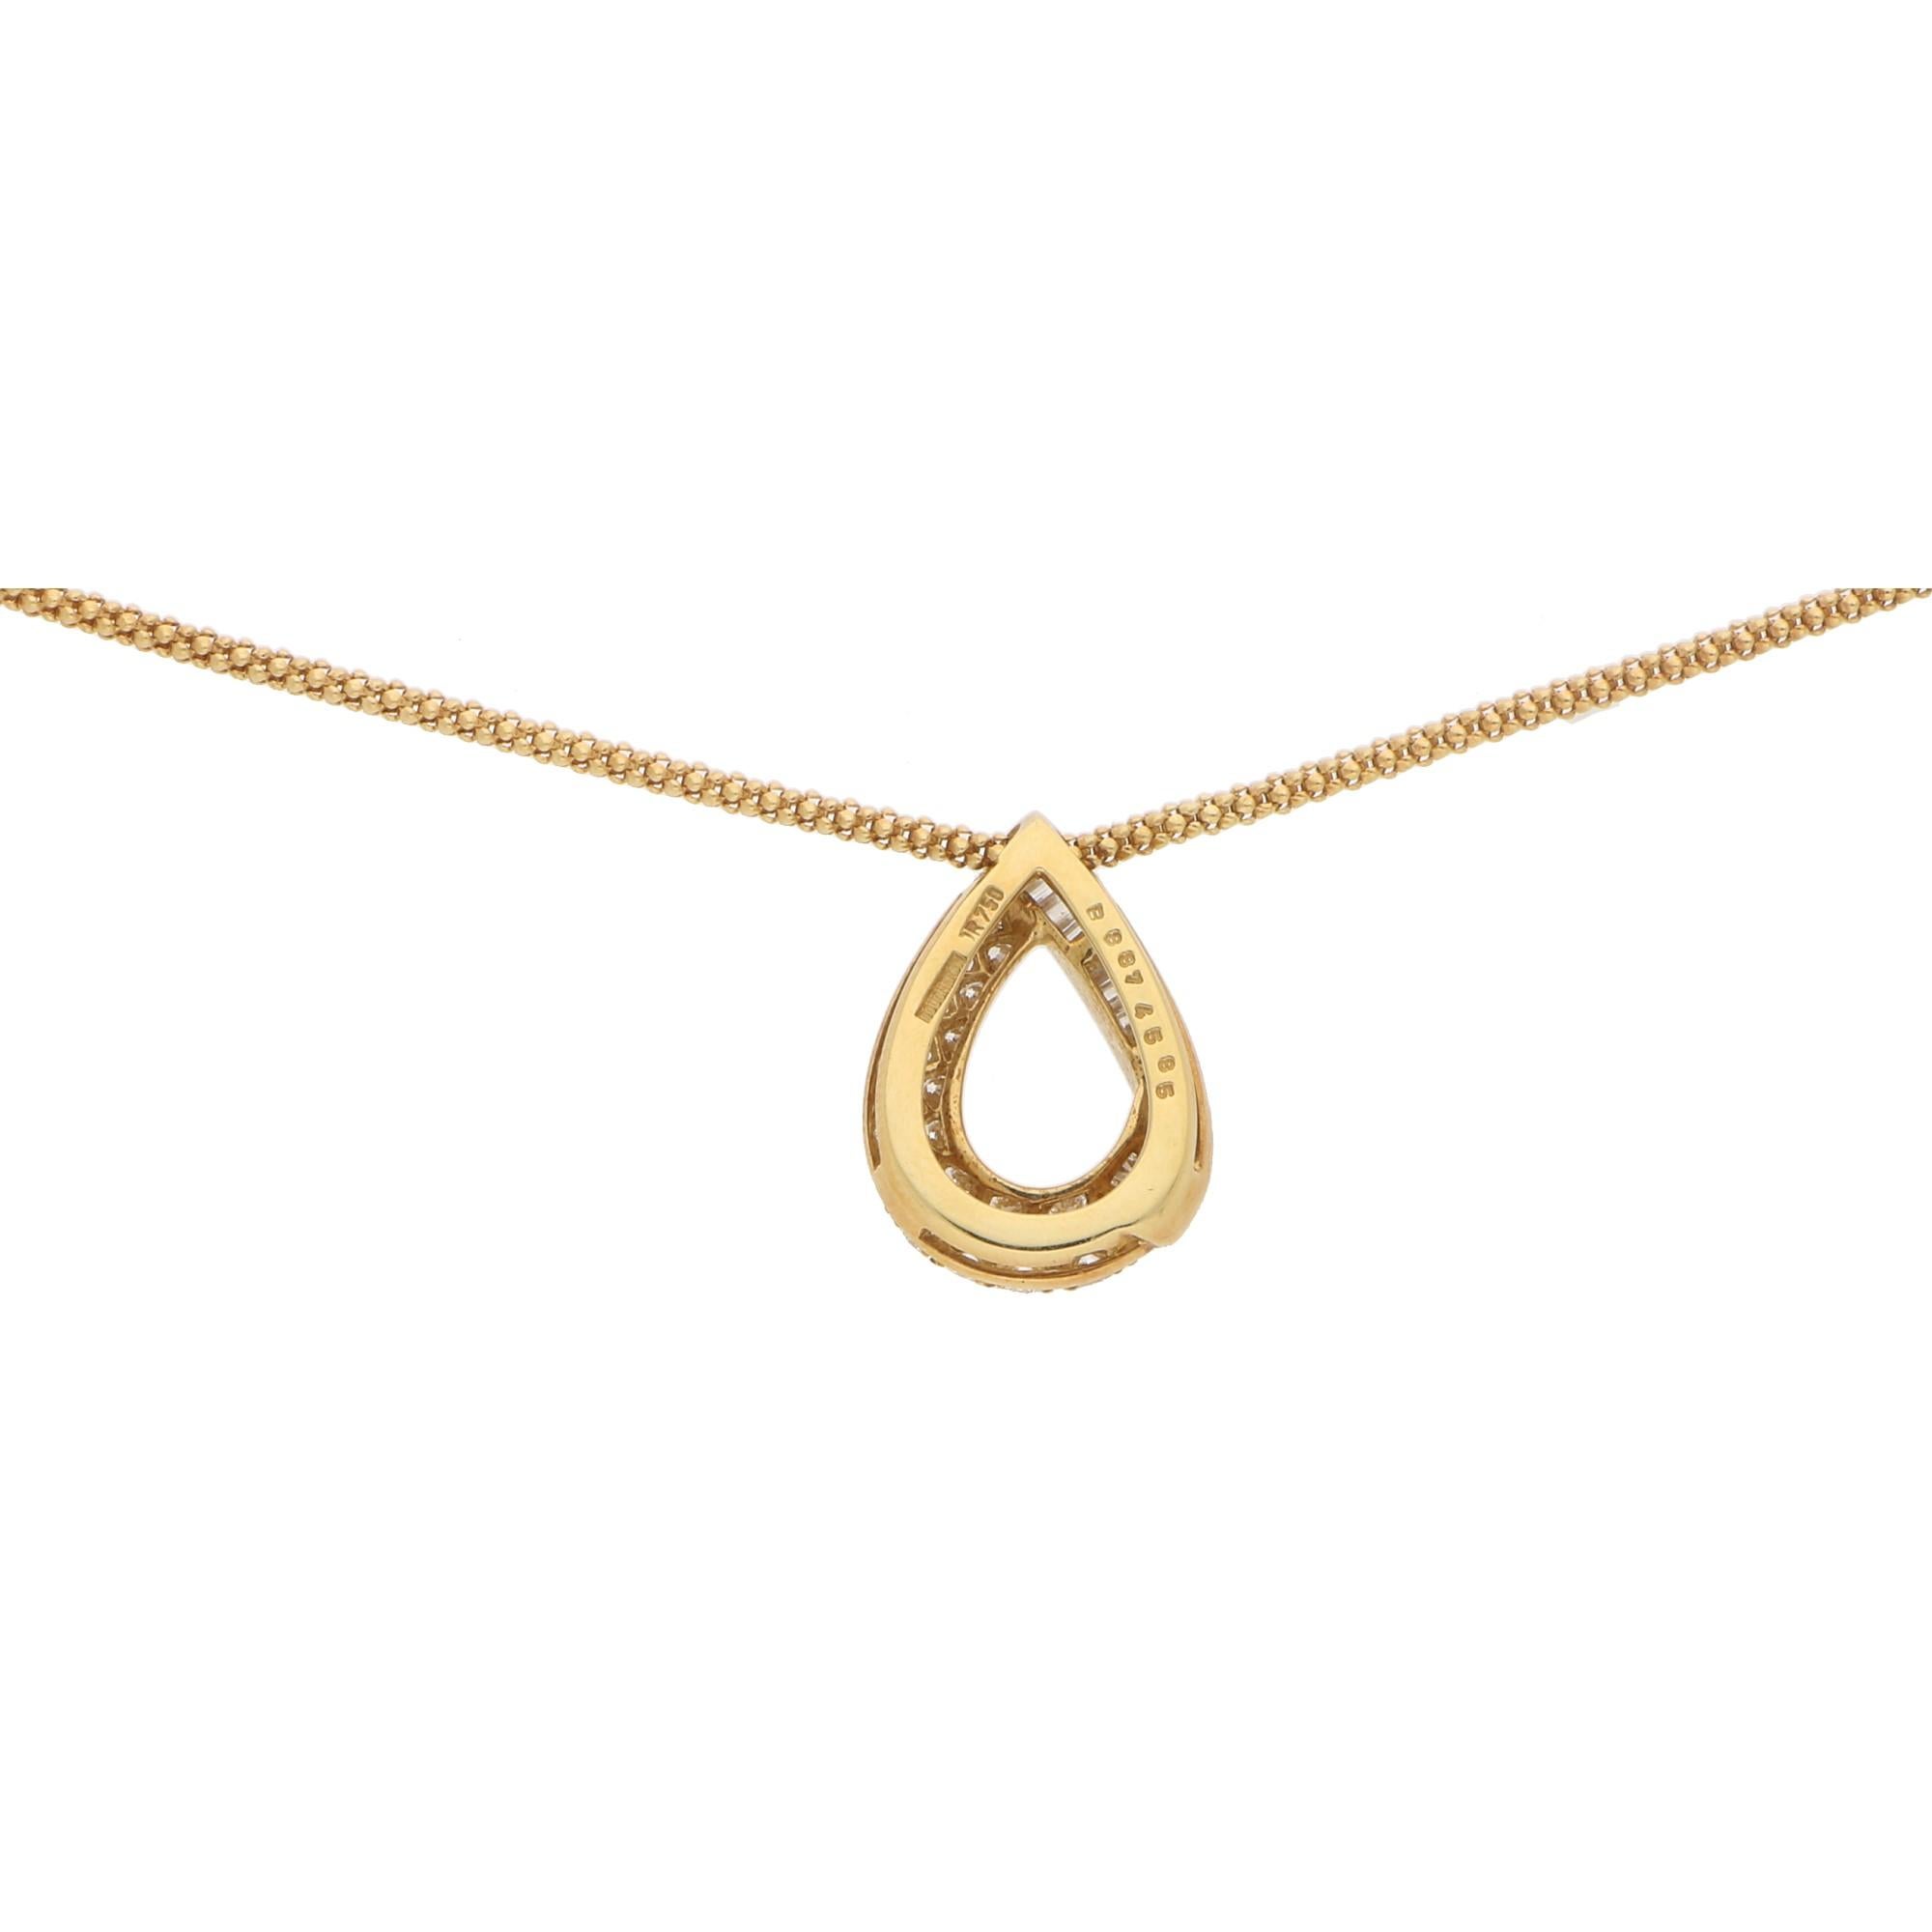 A rather interesting Boucheron diamond pendant and chain set in 18k yellow gold. The pendant is beautifully crafted and designed as an open pear-shape bombe loop. It is pave set half-way with 31 round brilliant cut diamonds with the other half of